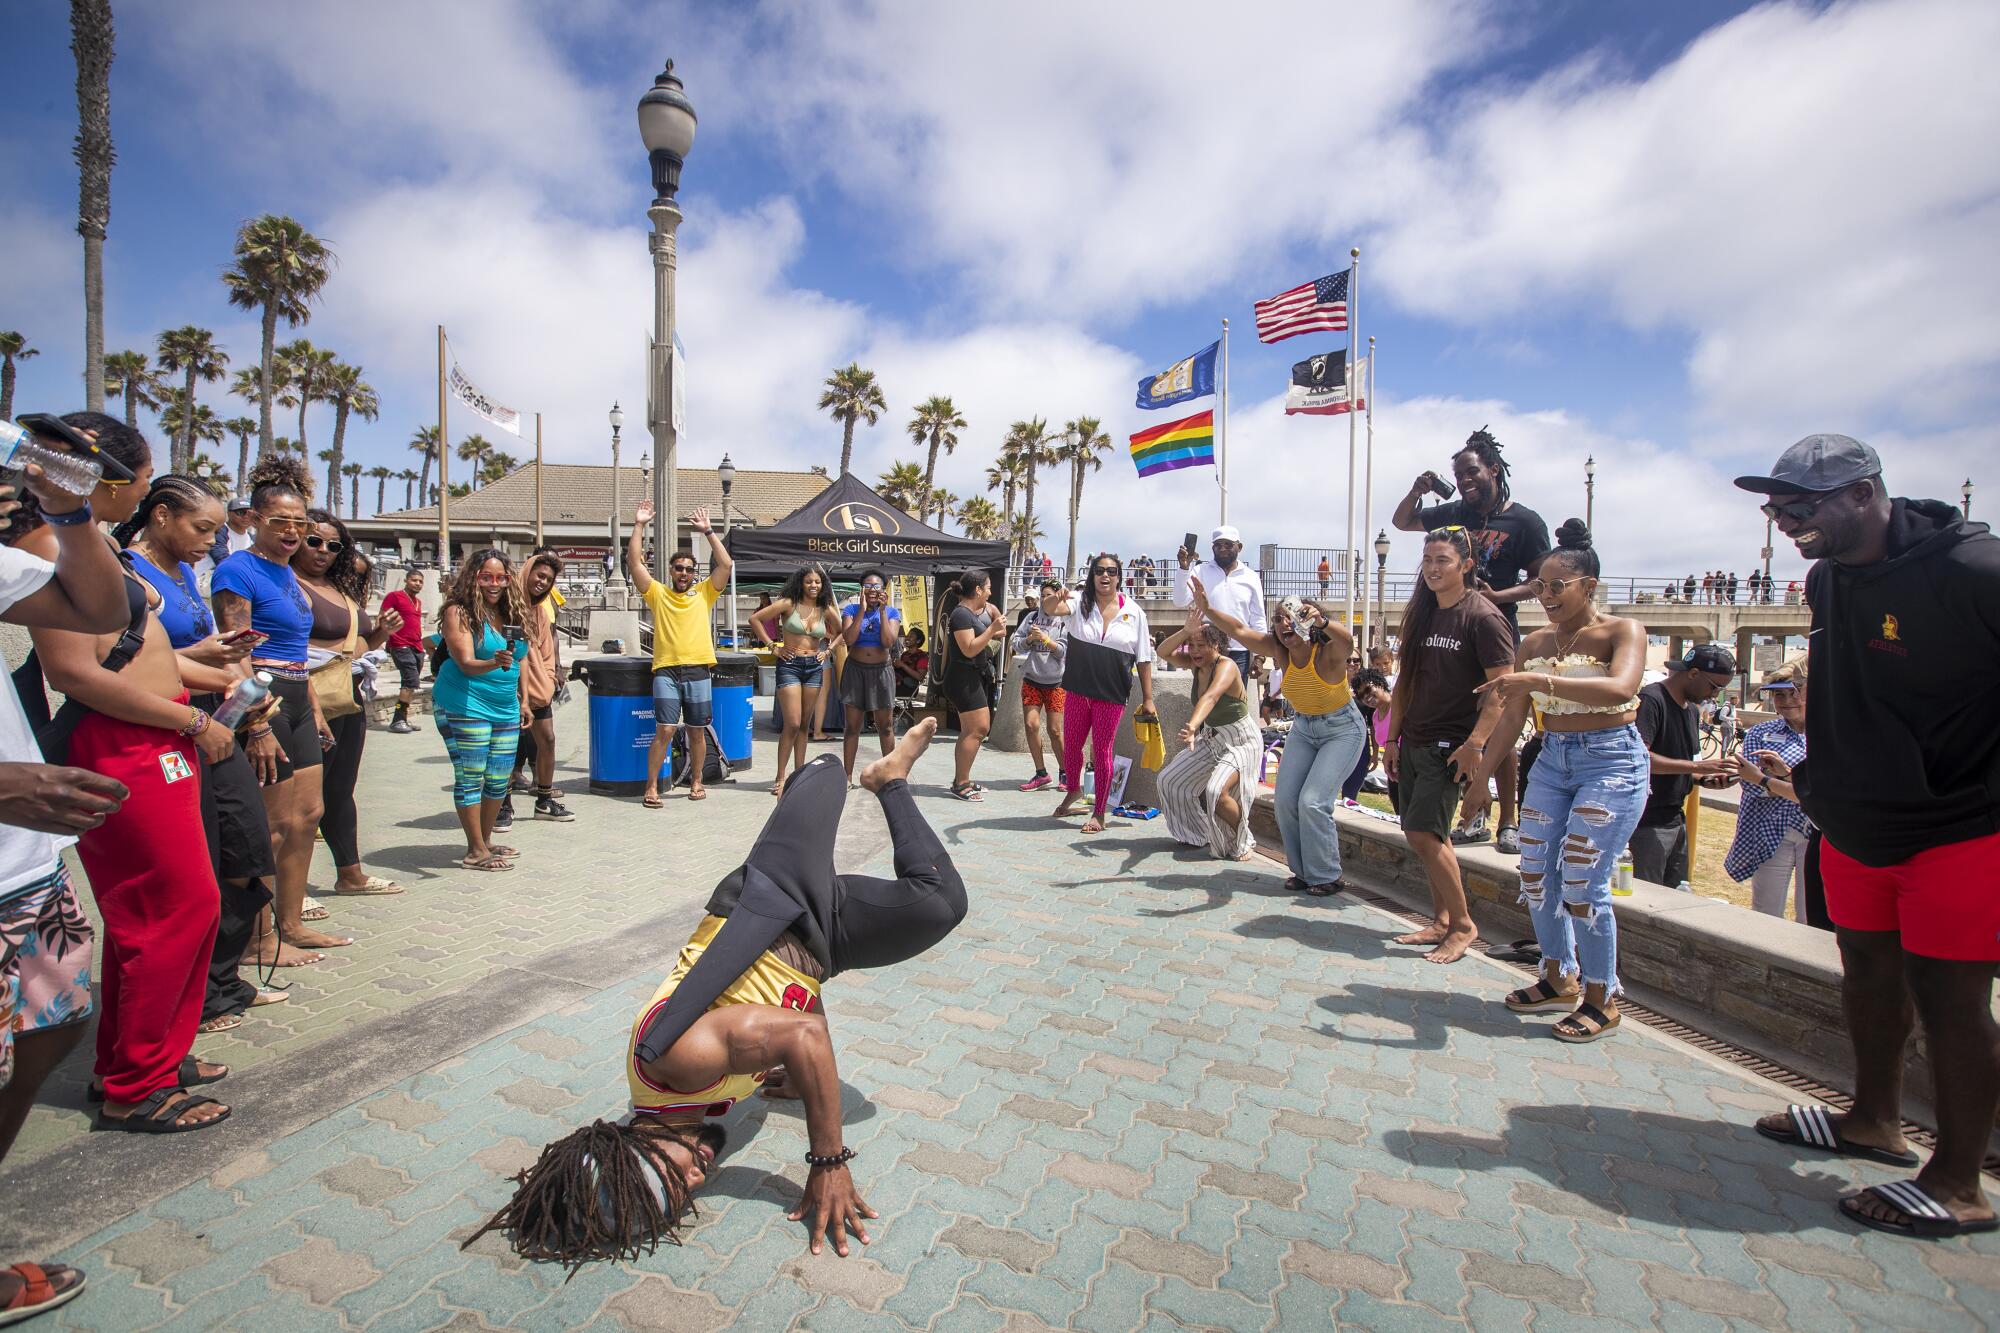 Daniel Kelly dances in front of a crowd at Pier Plaza during "A Great Day in the Stoke" in Huntington Beach on Saturday.